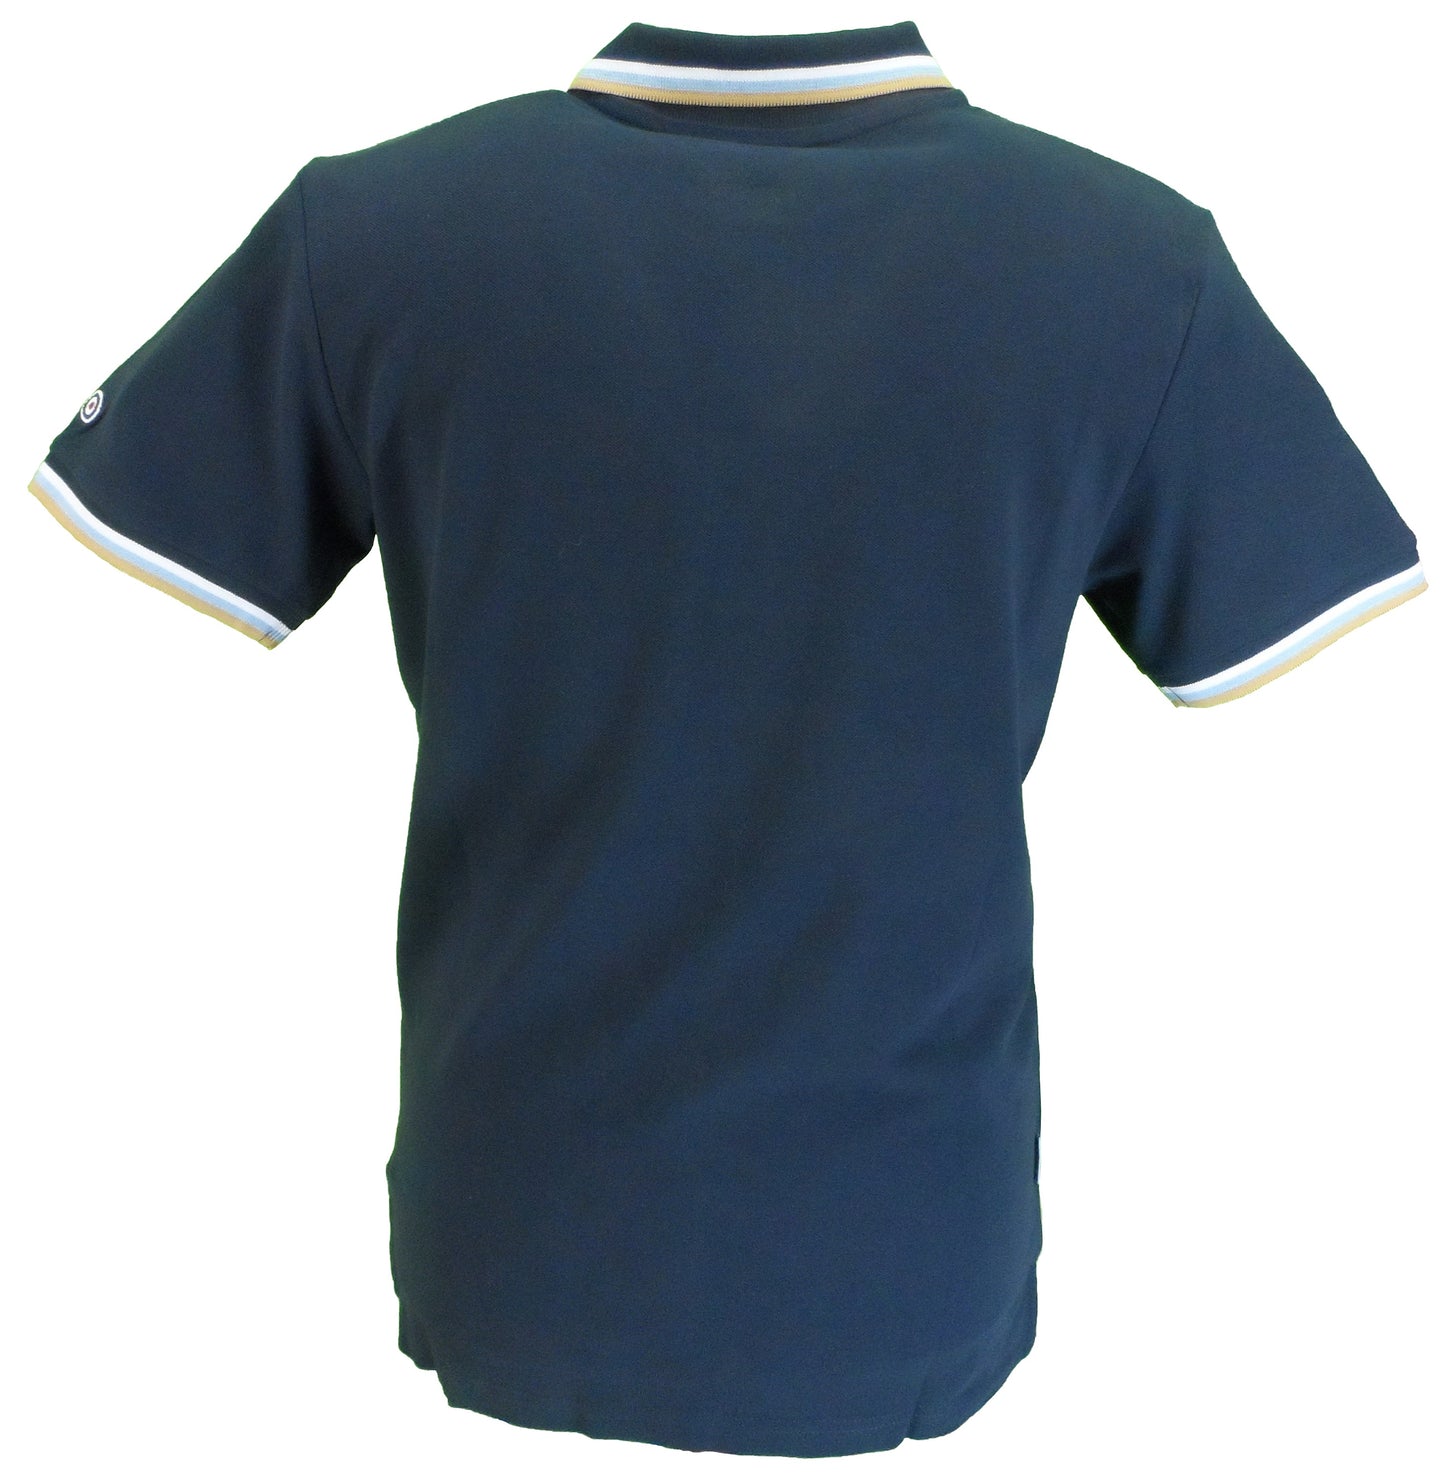 Lambretta Mens Retro Navy/White/coolblue/Biscuit Polo Shirts